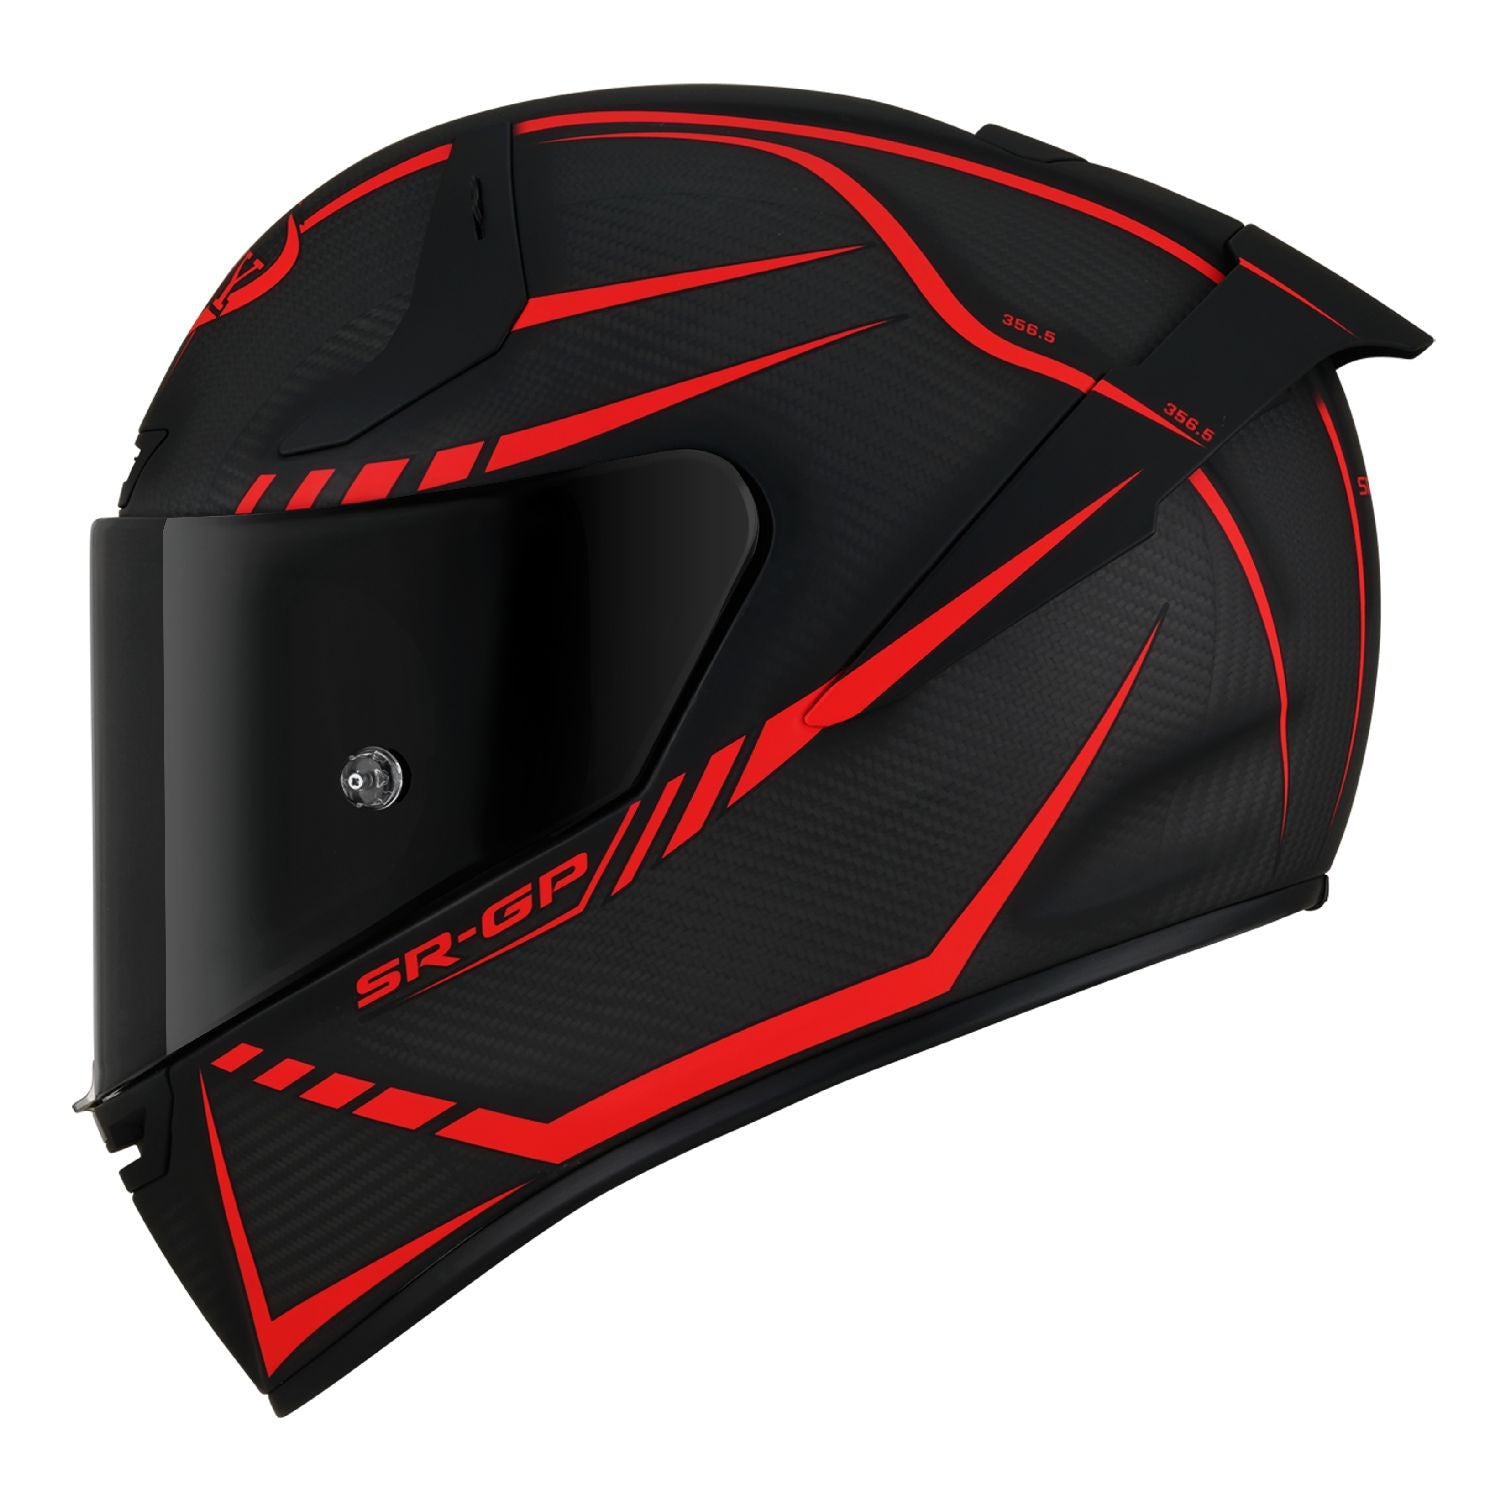 Suomy SR-GP Carbon Supersonic Full Face Motorcycle Helmet (XS - 2XL)